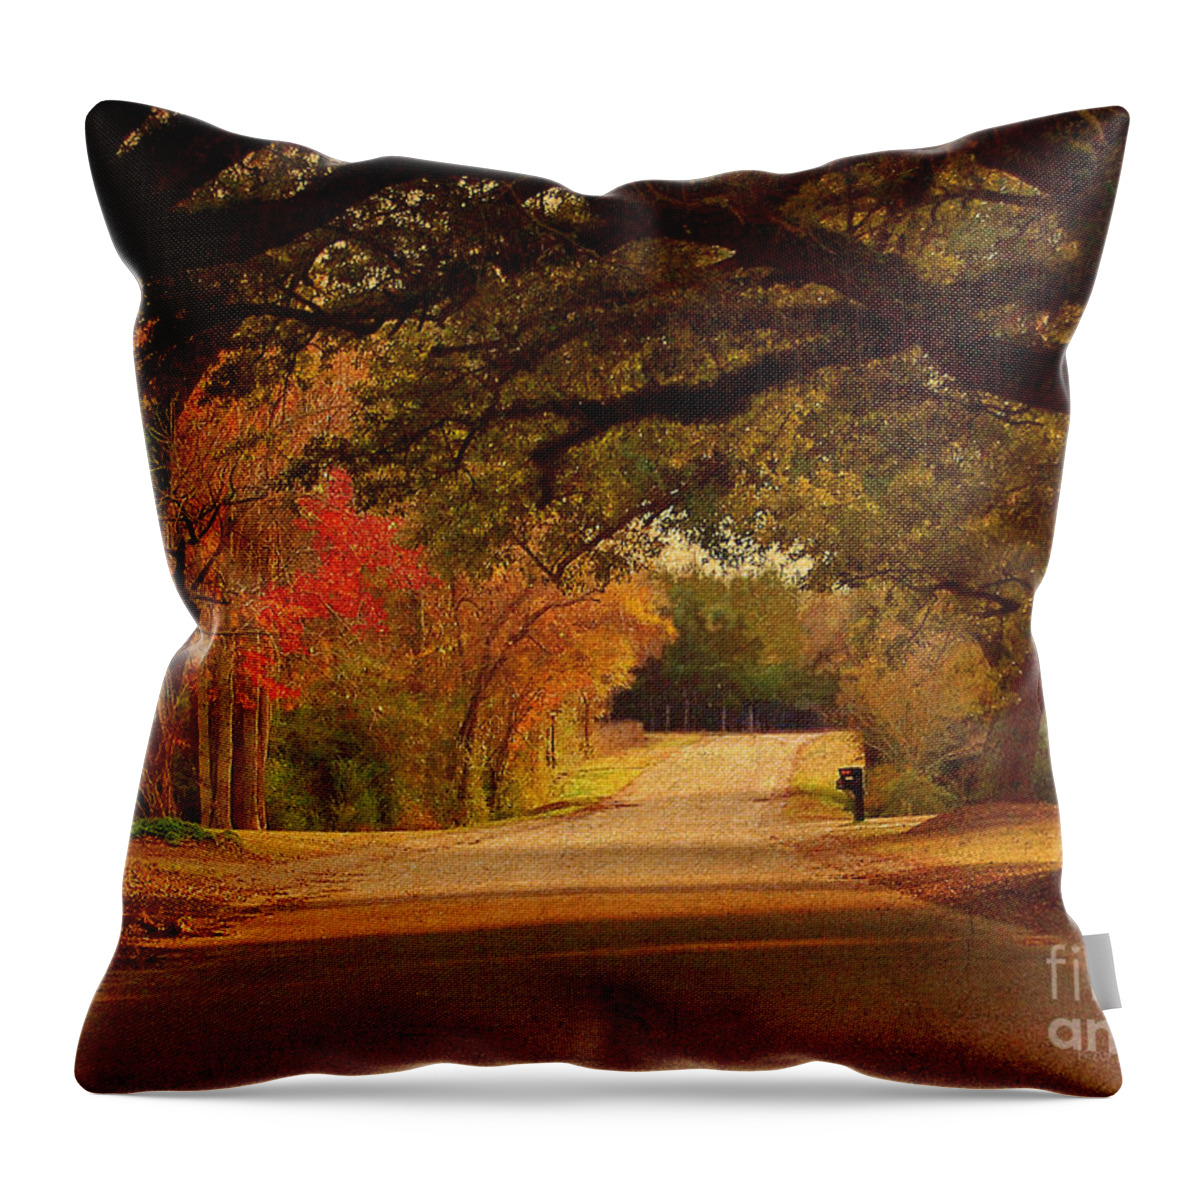 Fall Throw Pillow featuring the photograph Fall Along A Country Road by Kathy Baccari